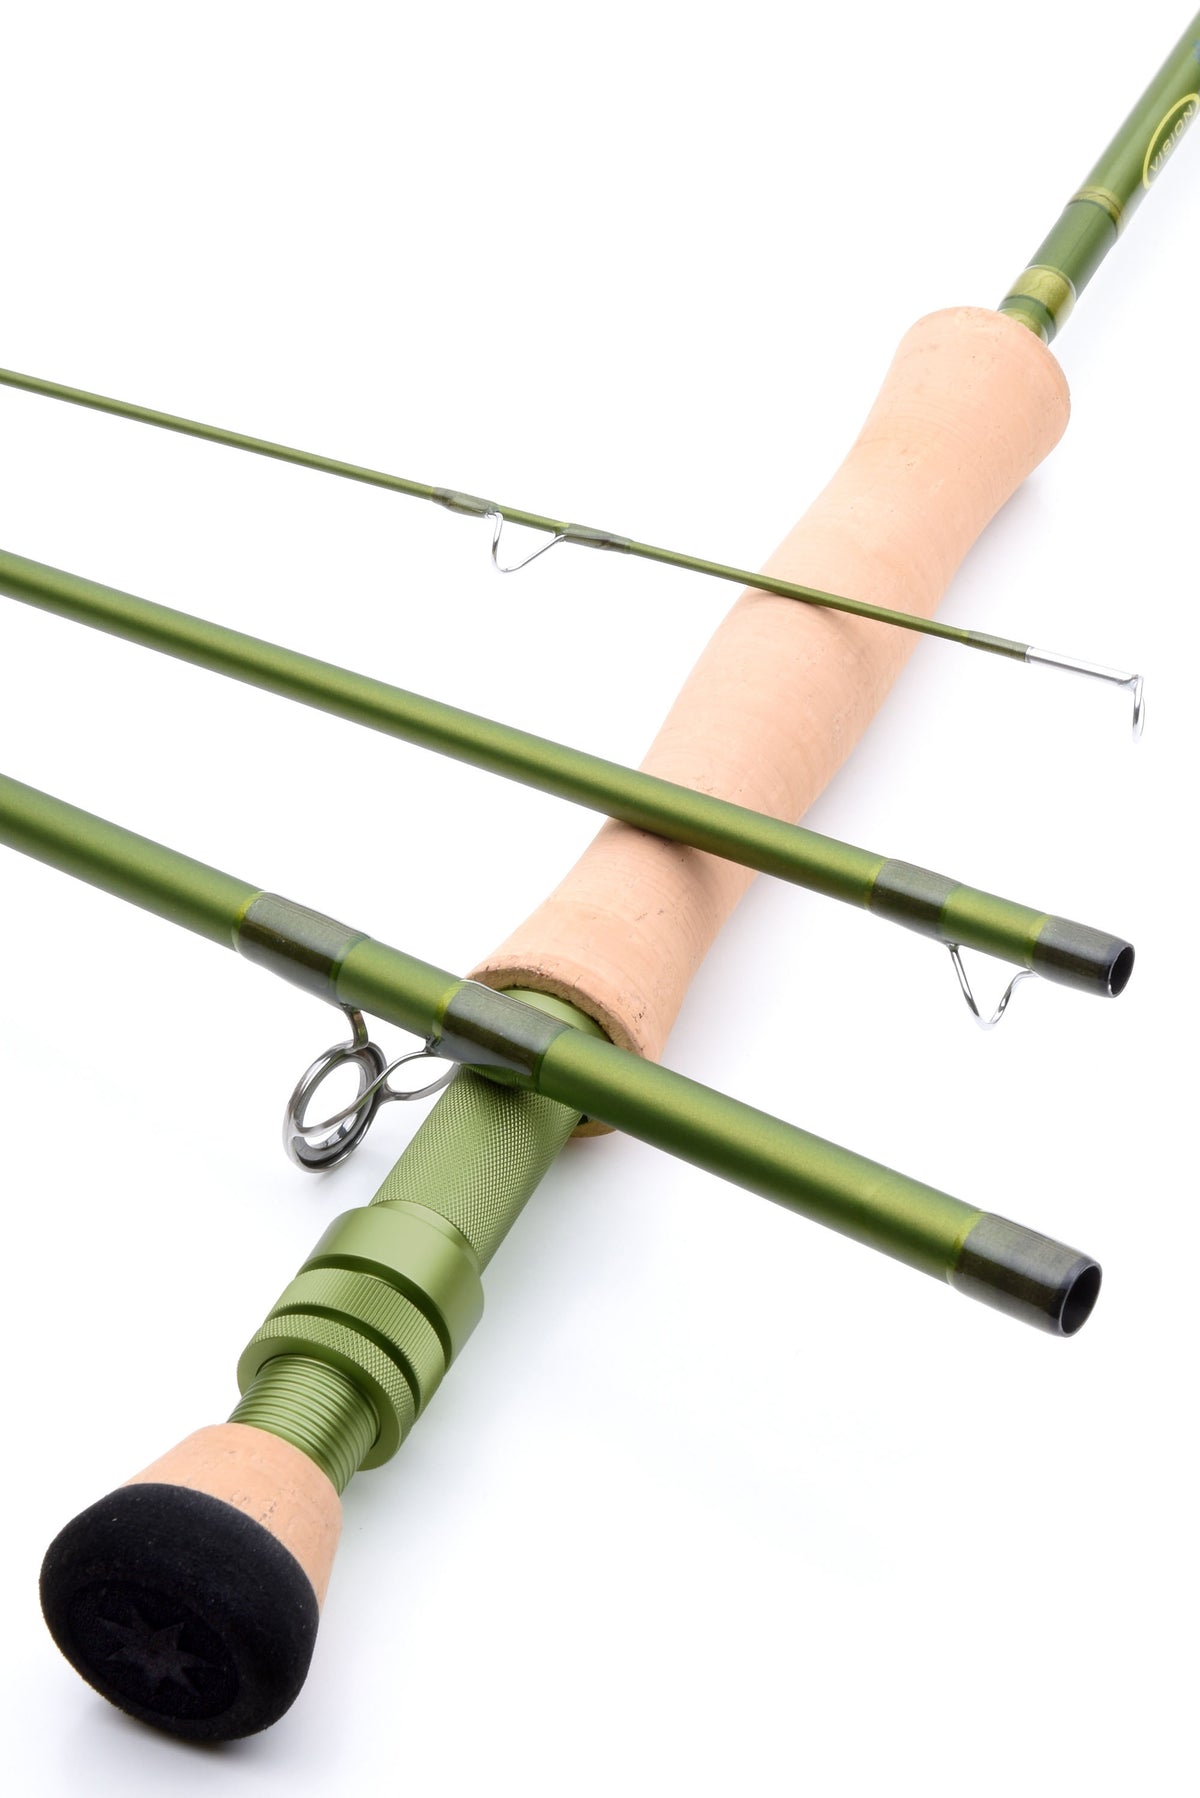 Vision Down Under Fly Rods — The Flyfisher